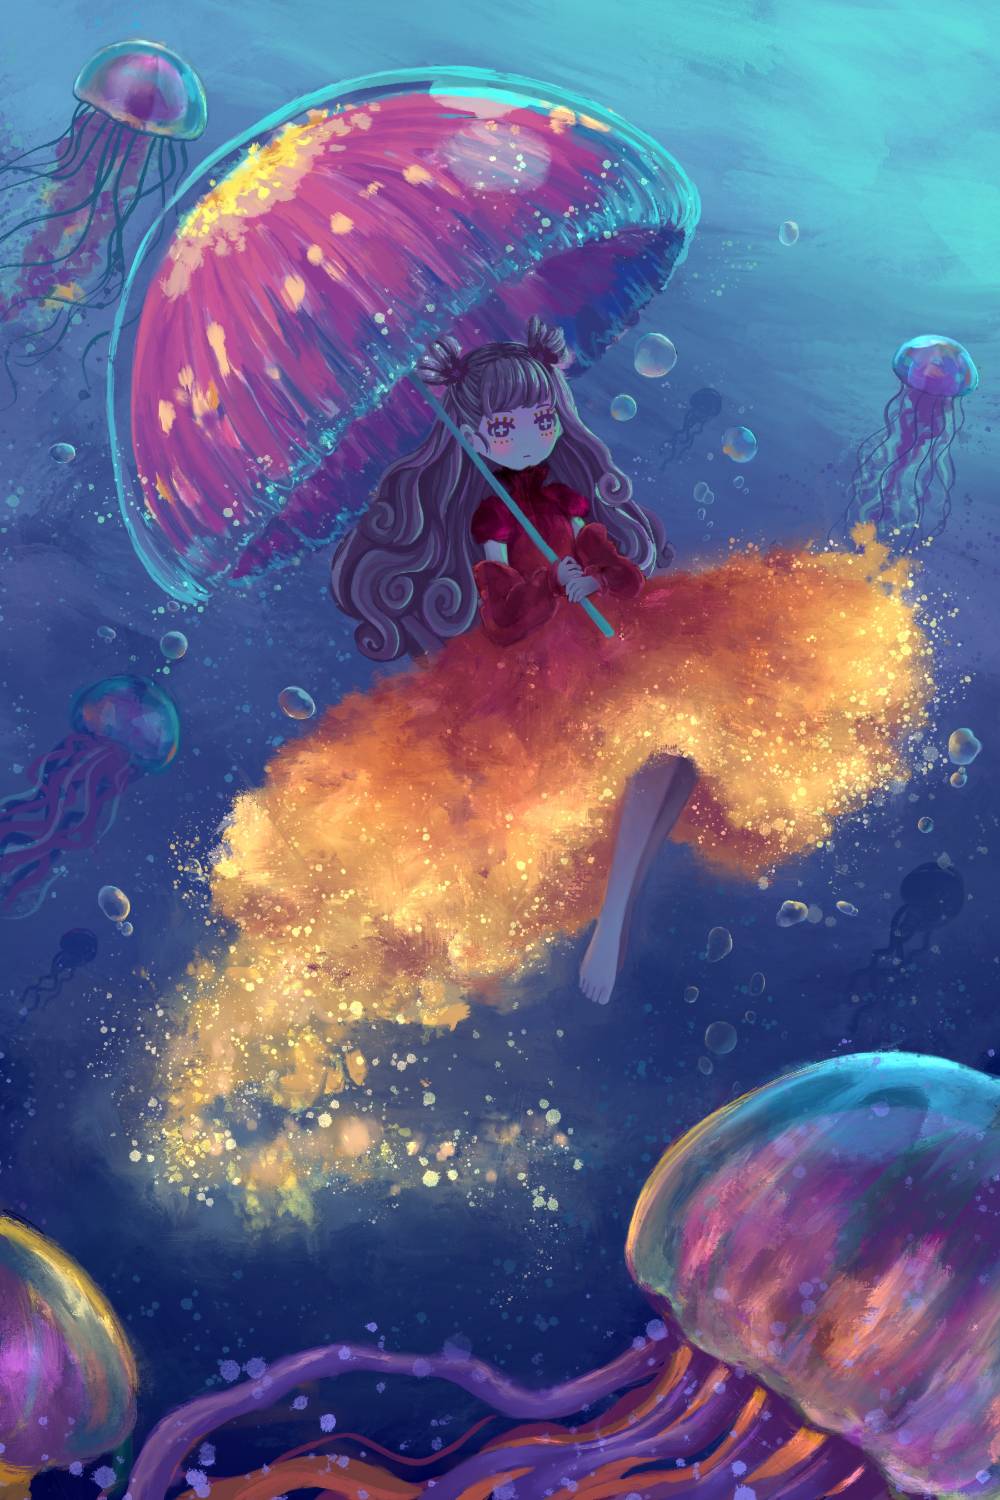 Character illustration in a underwater setting surrounded by purple jellyfish